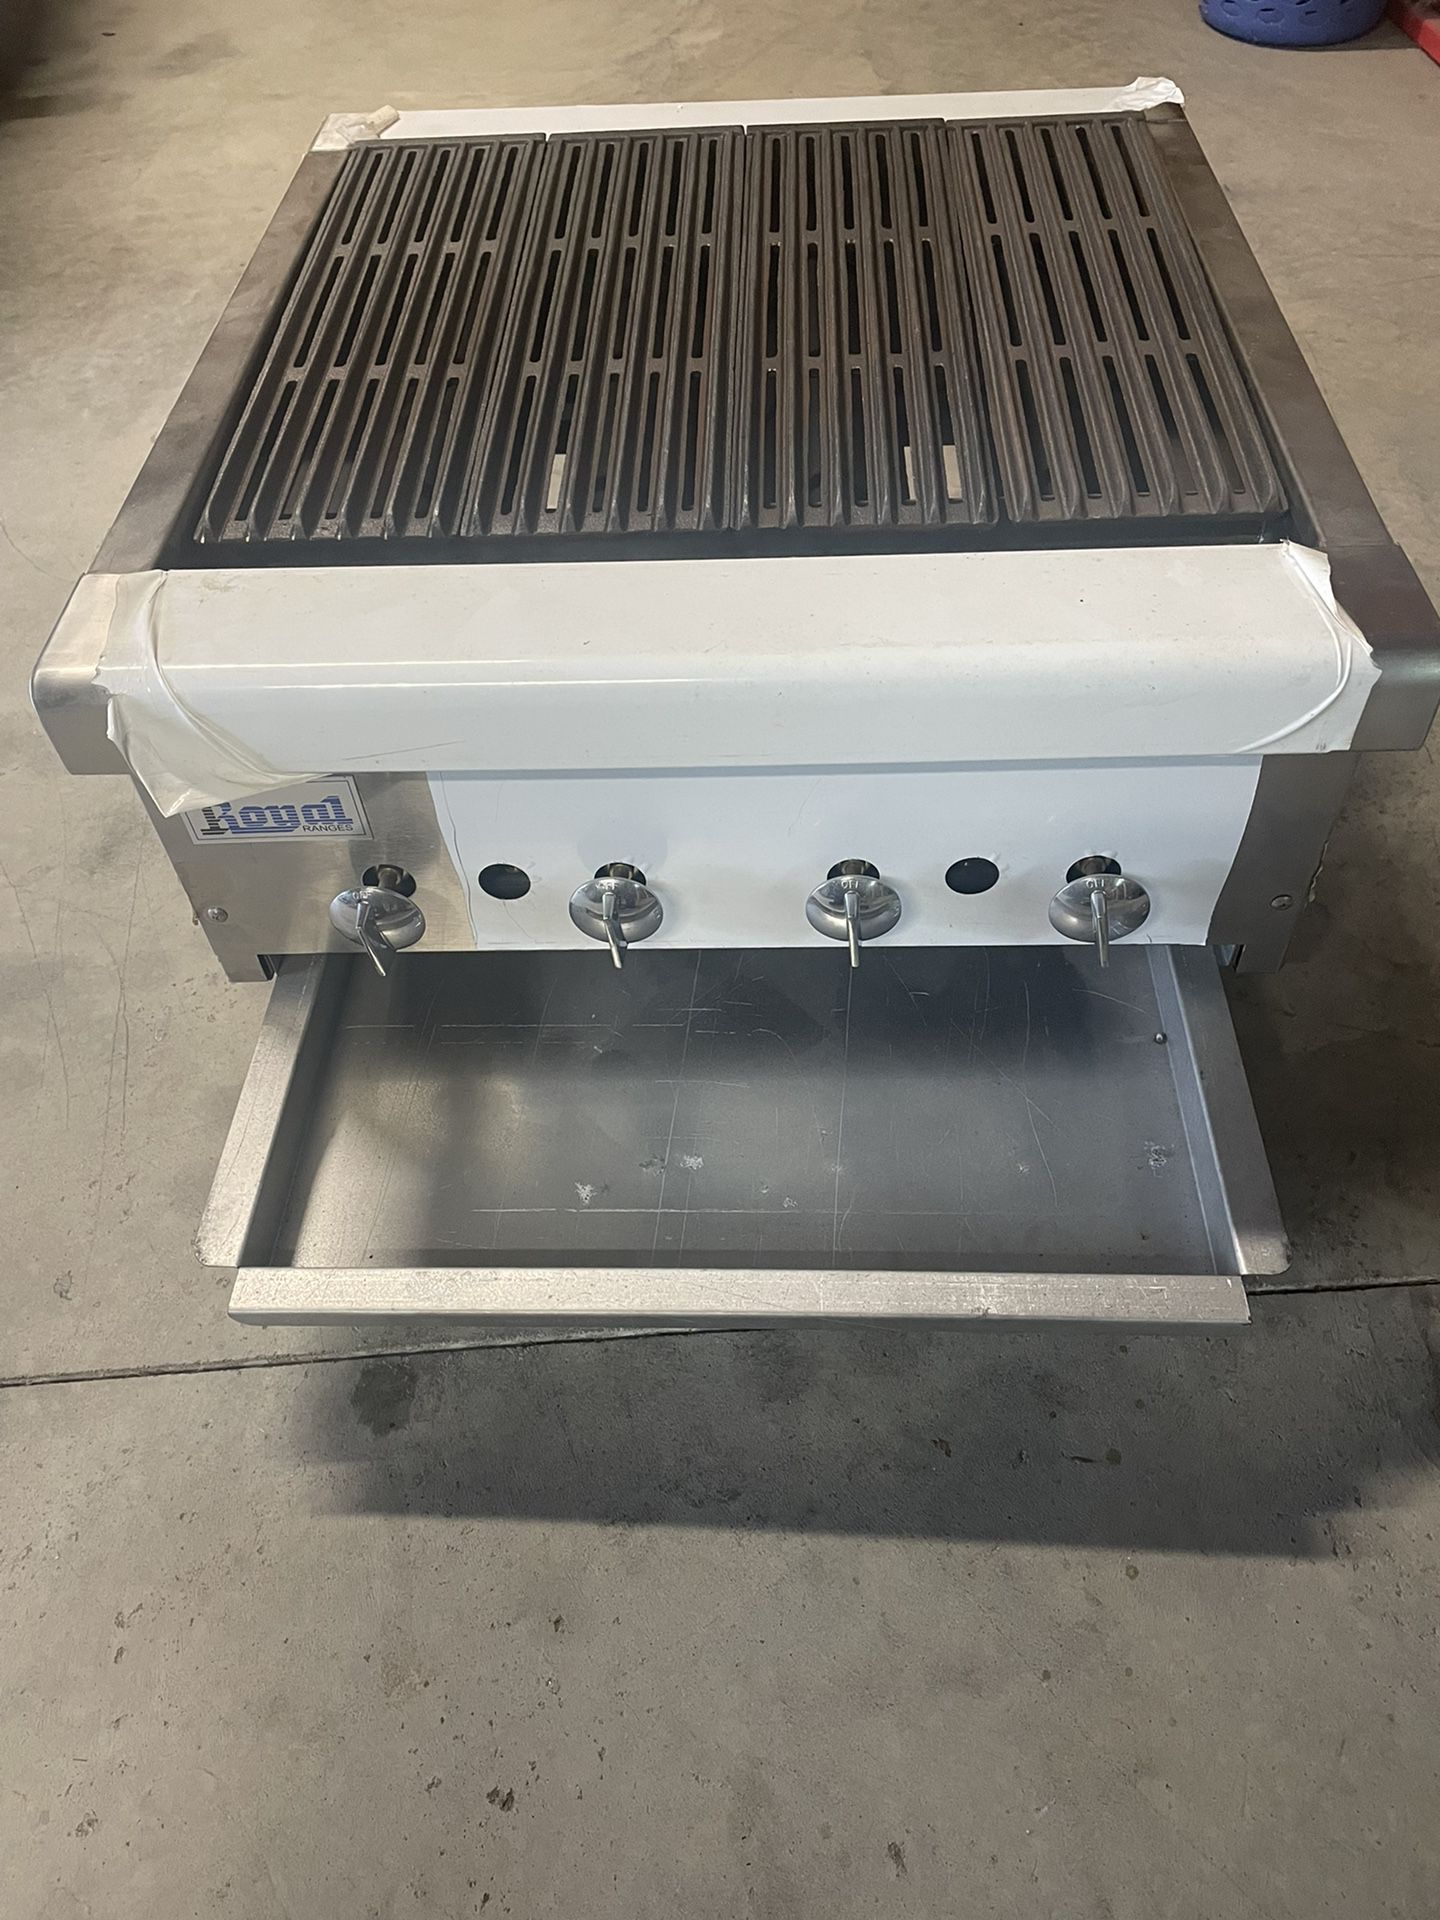 24” Royal commercial natural gas grill